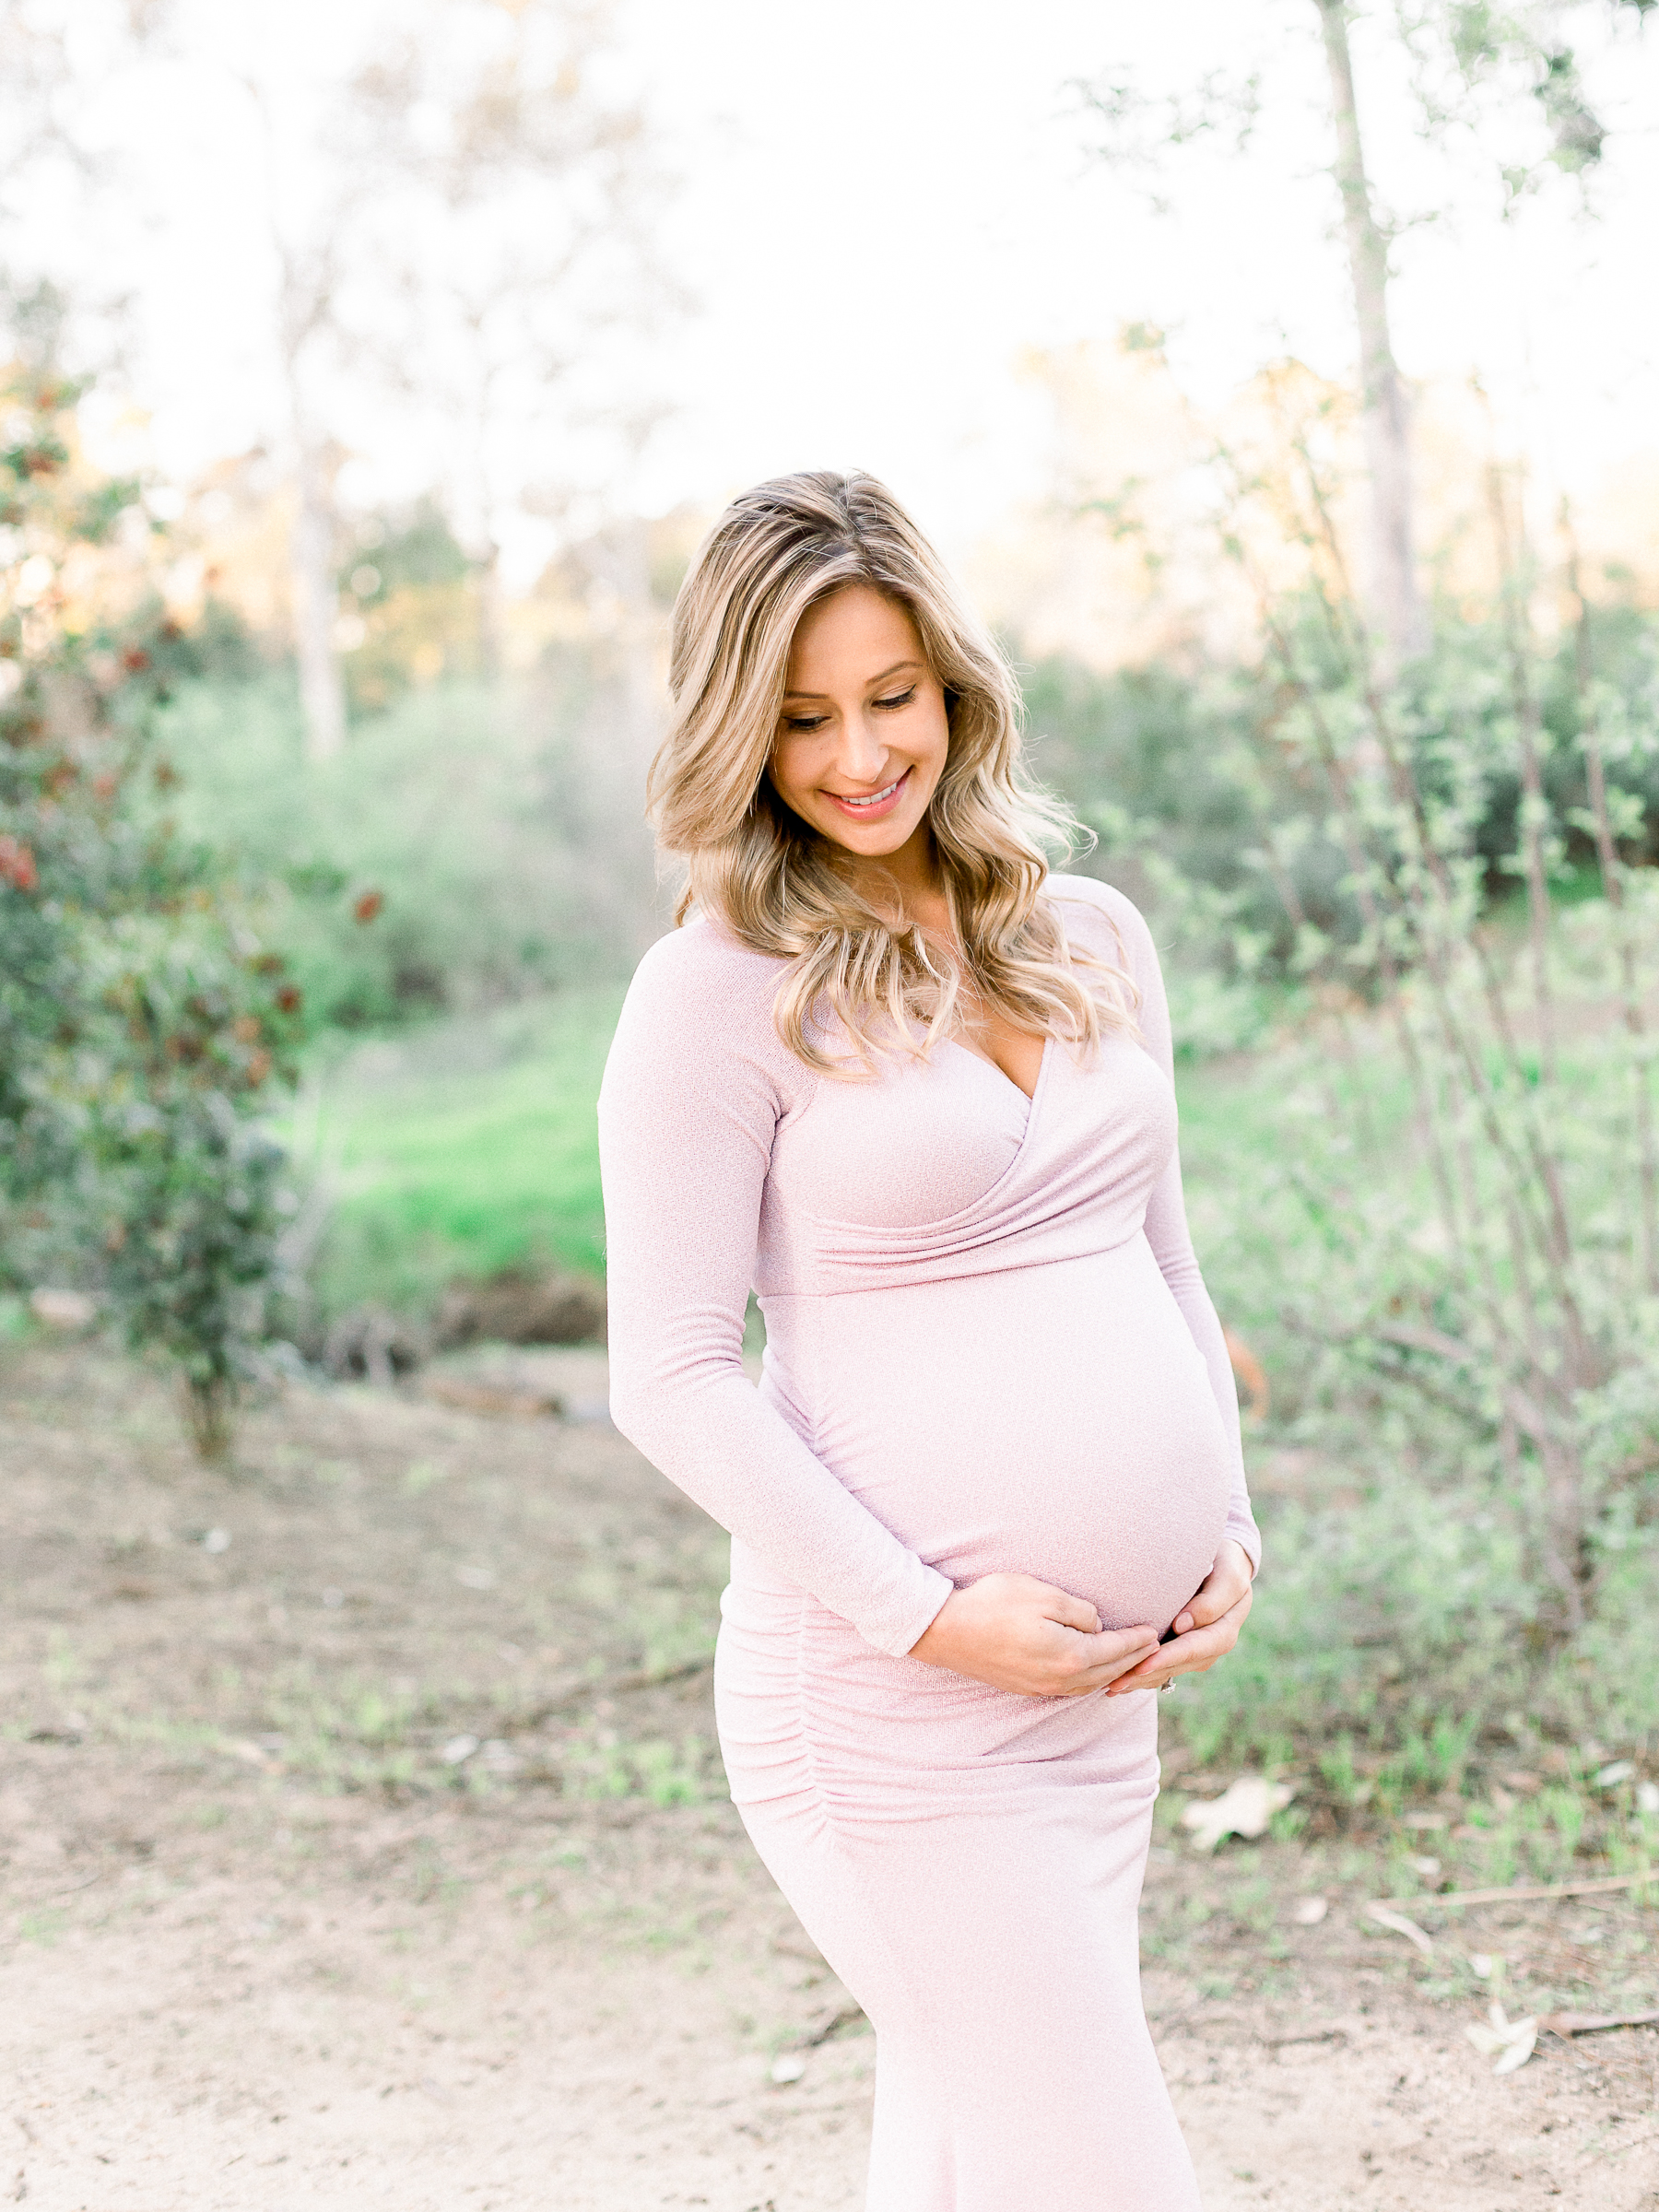 Pregnant woman smiling while holding her baby bump during her photo session